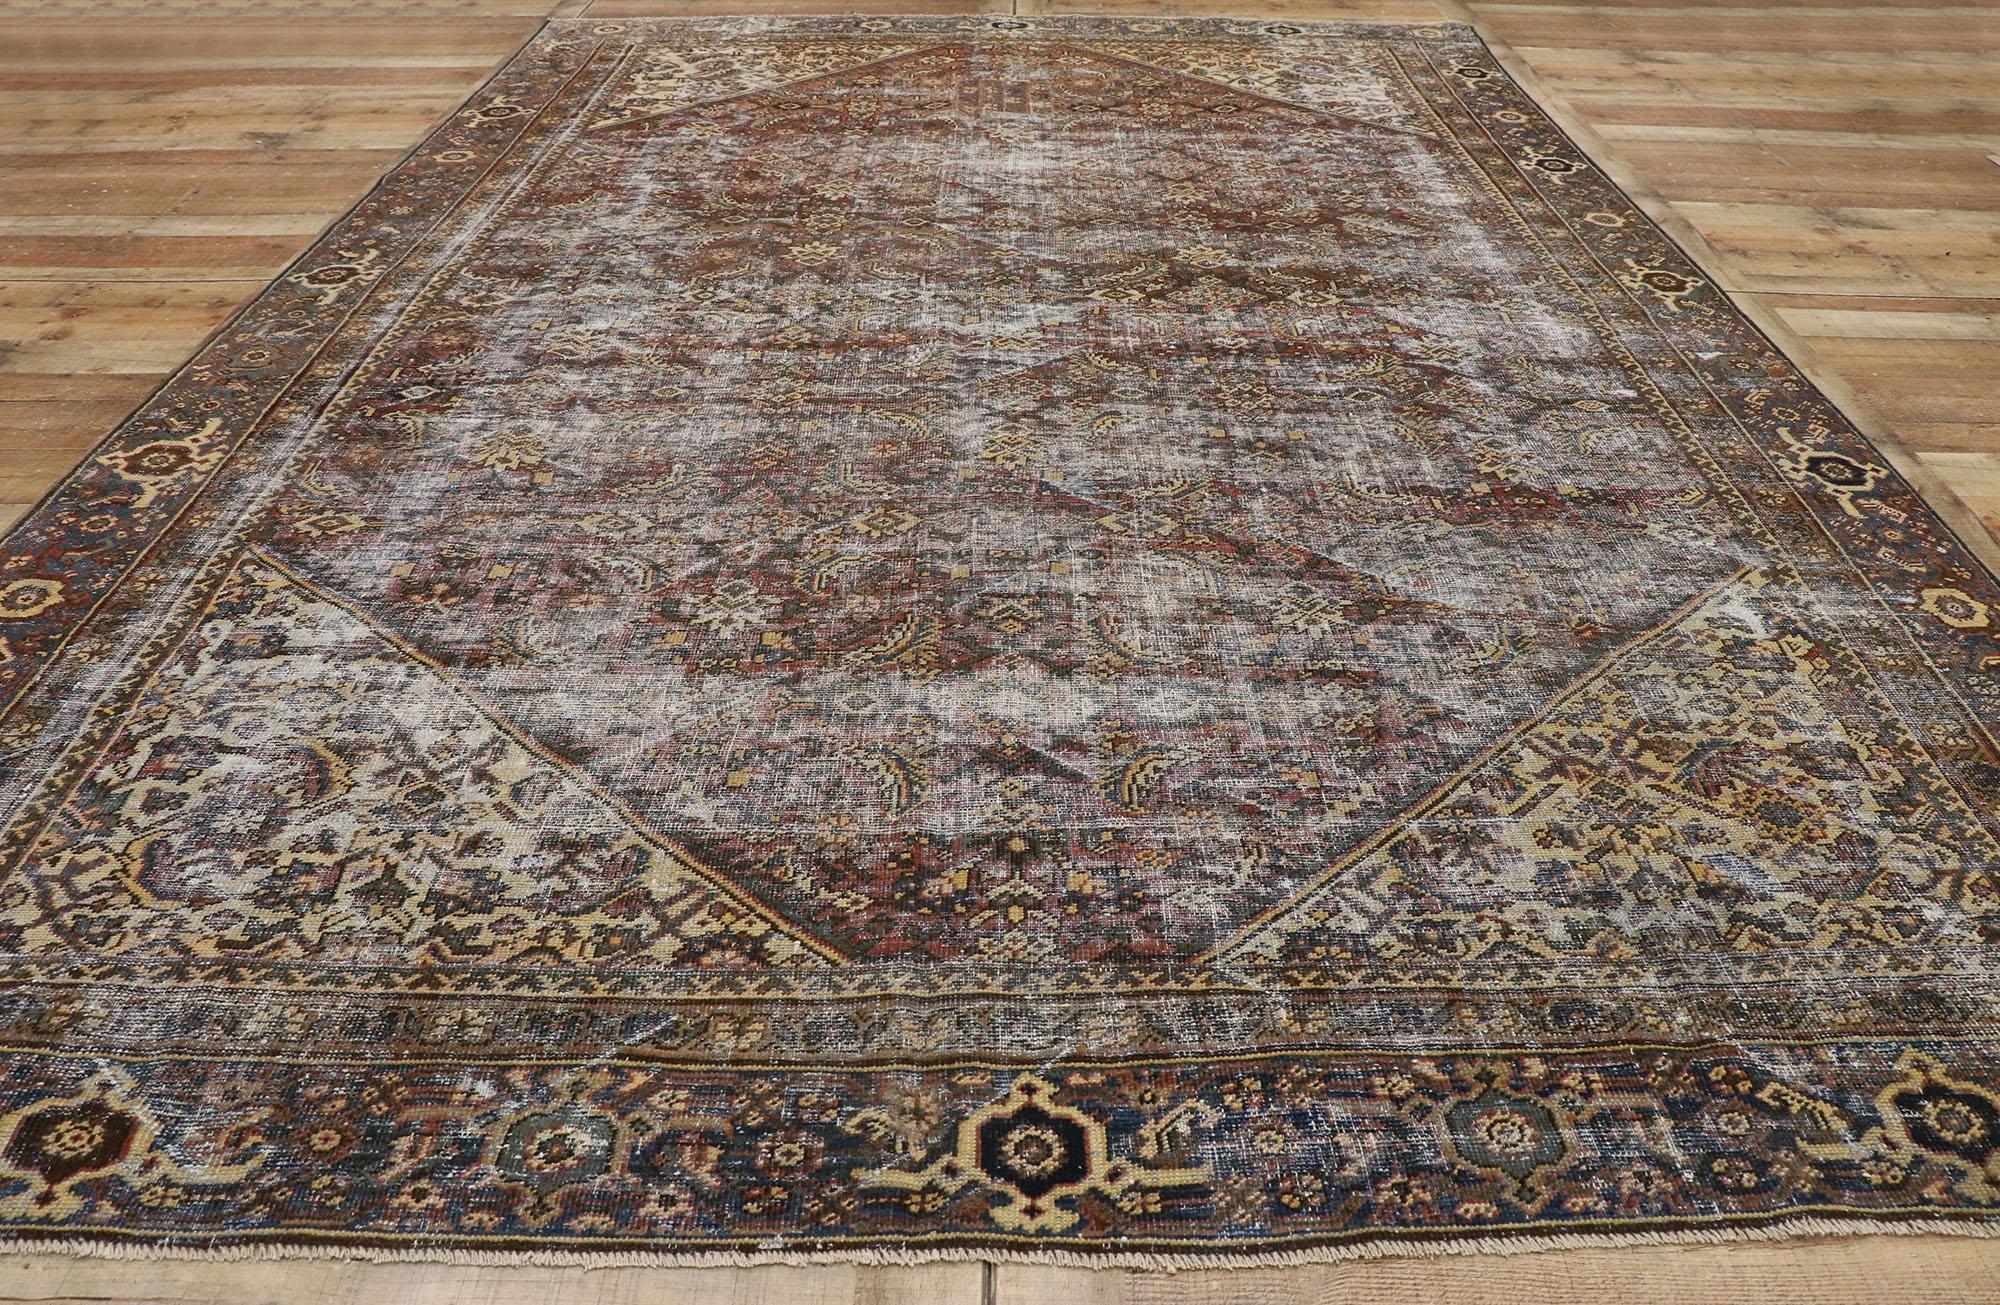  Distressed Antique Persian Mahal Rug with Traditional English Rustic Style  5